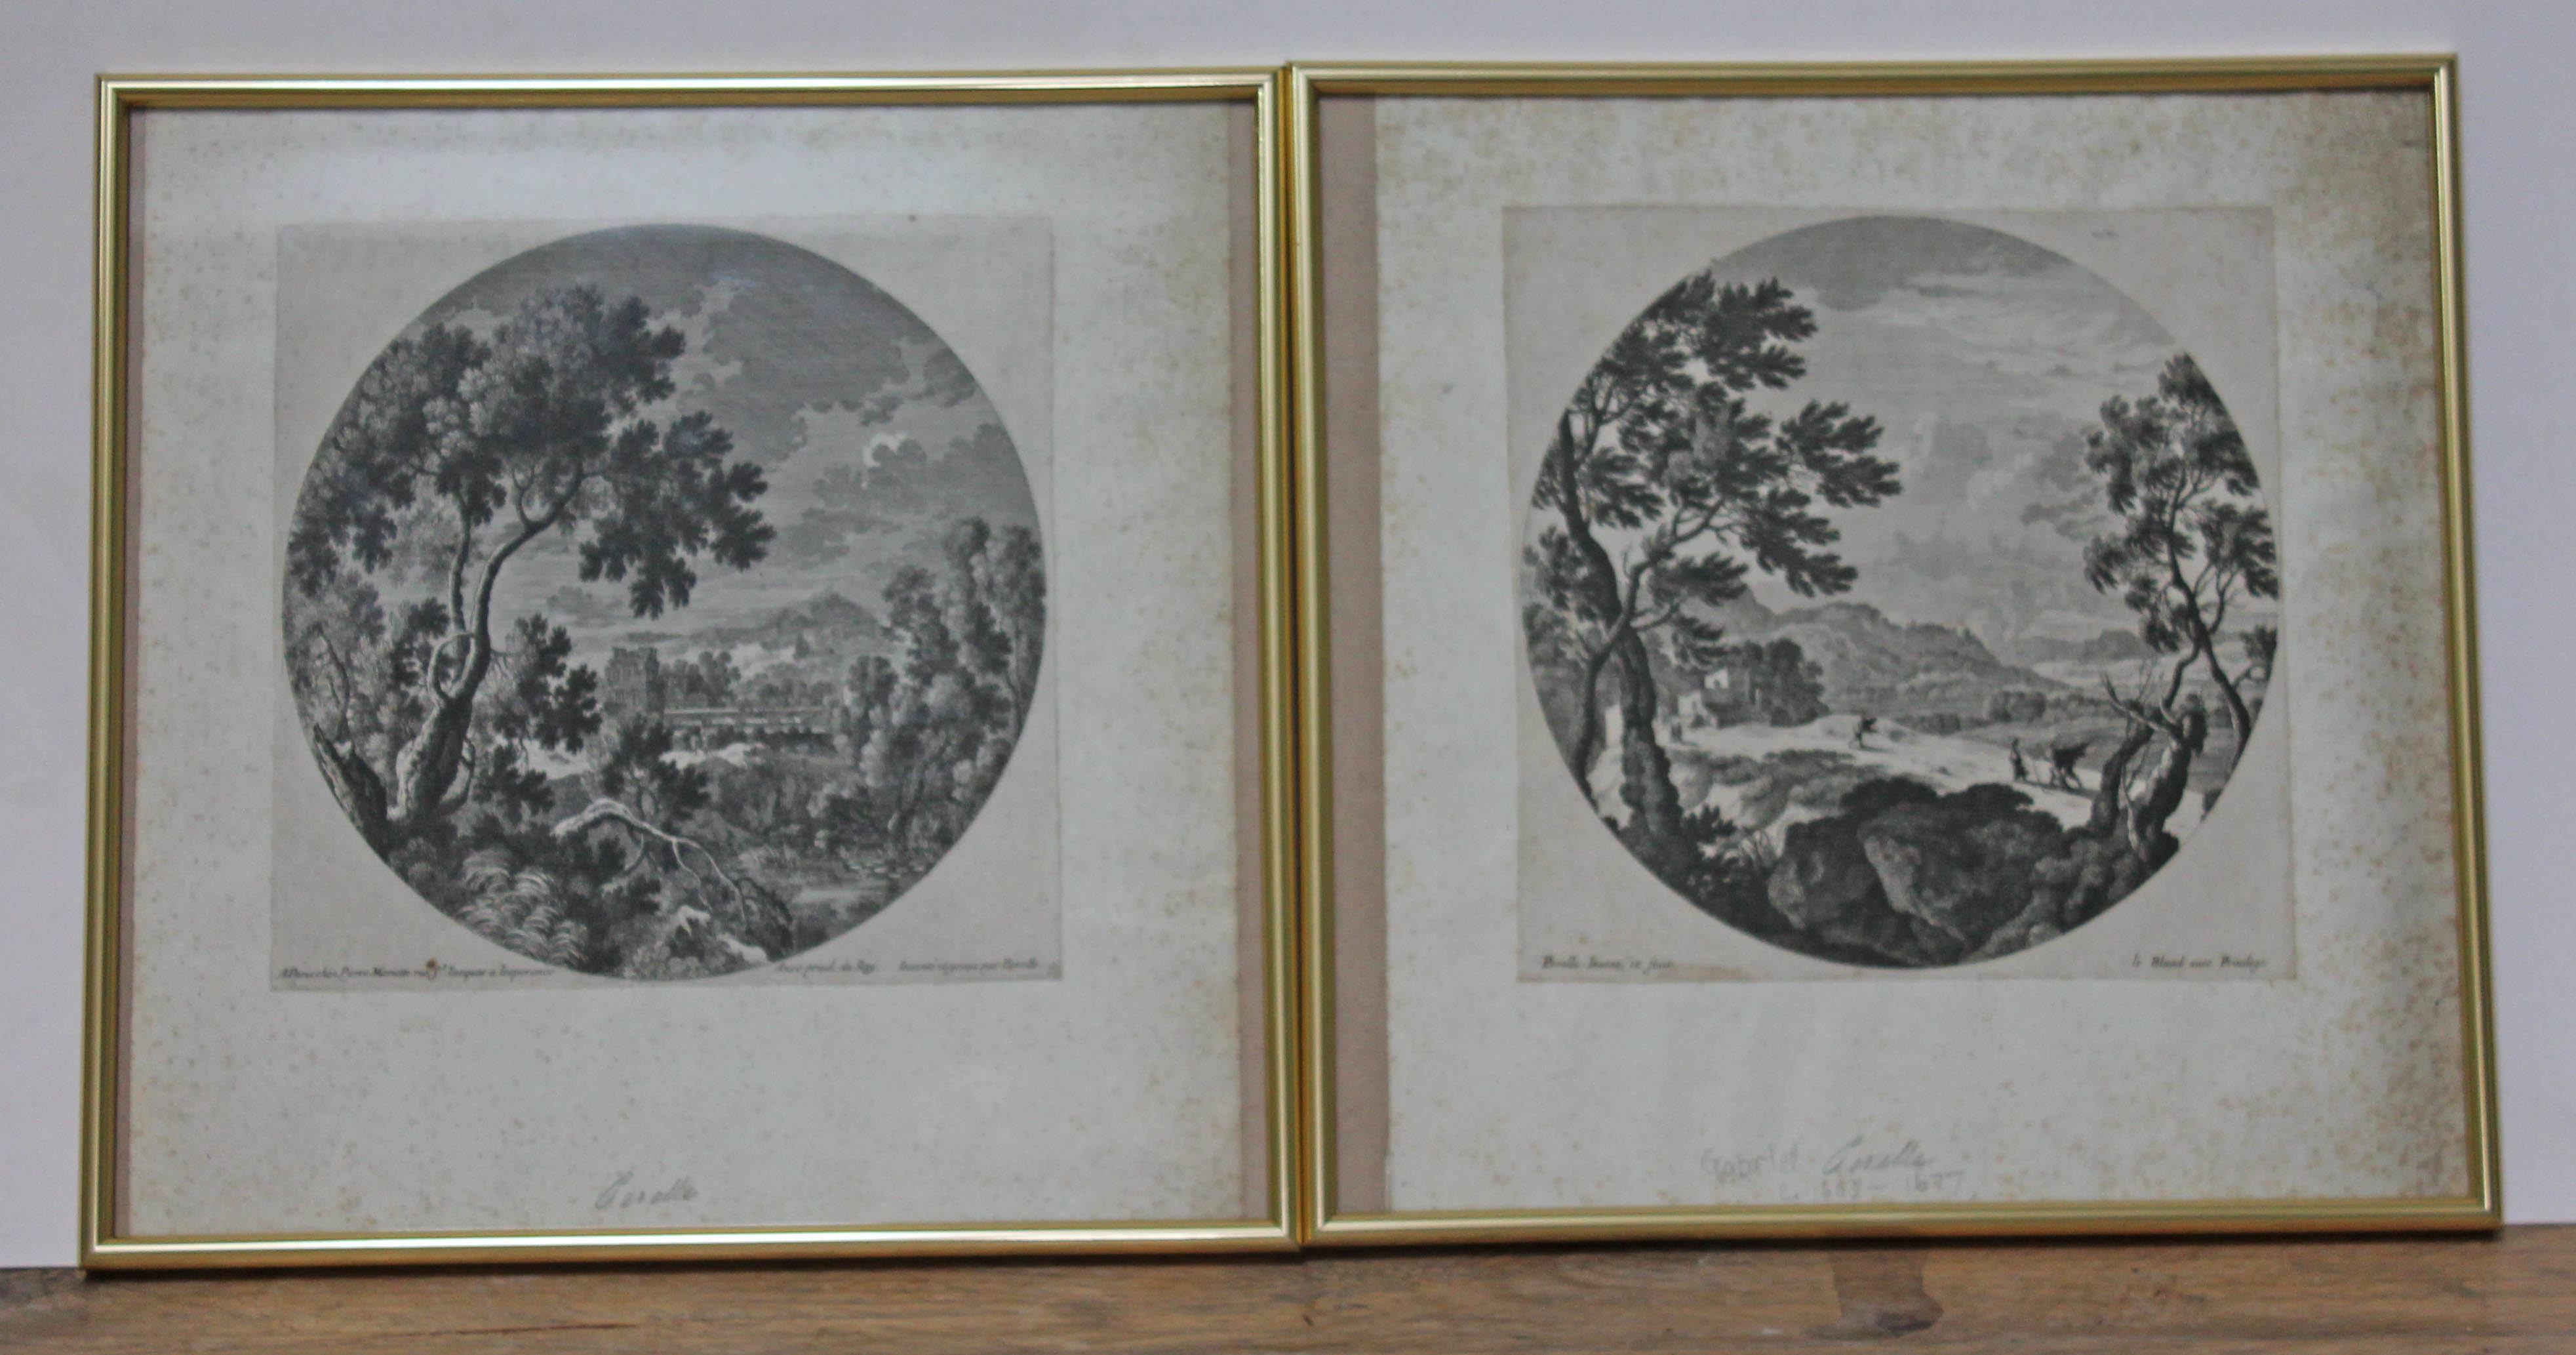 A group of five Gabrie Perelle (1603-1677) prints, two approx. 20cm x 20cm and two others smaller.